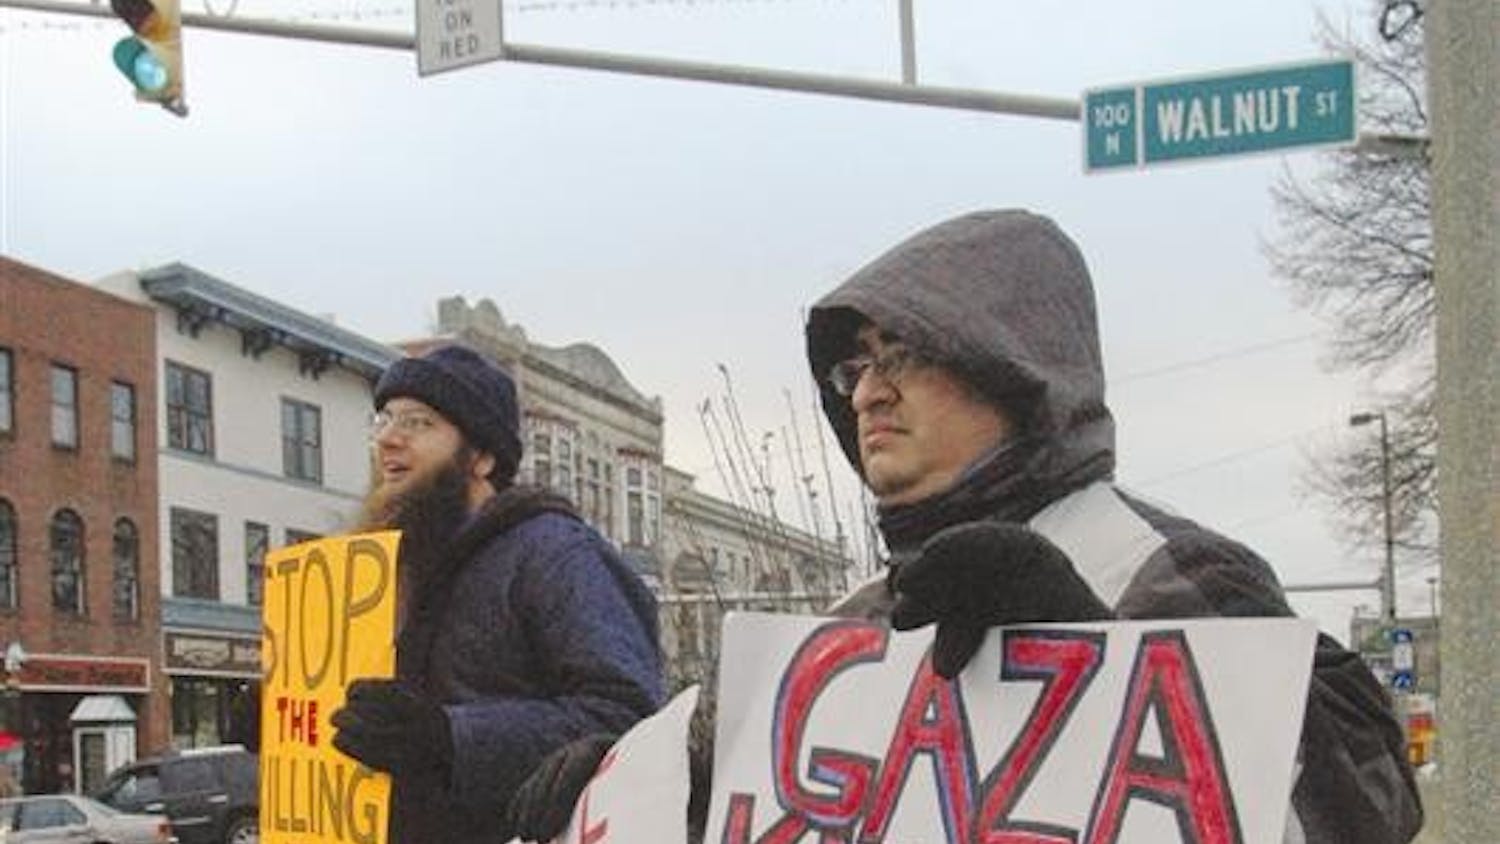 James Cooper (left) and Edward  Vasquez (right), two organizers for a demonstration on the conflict in Gaza, stood at the courthouse.